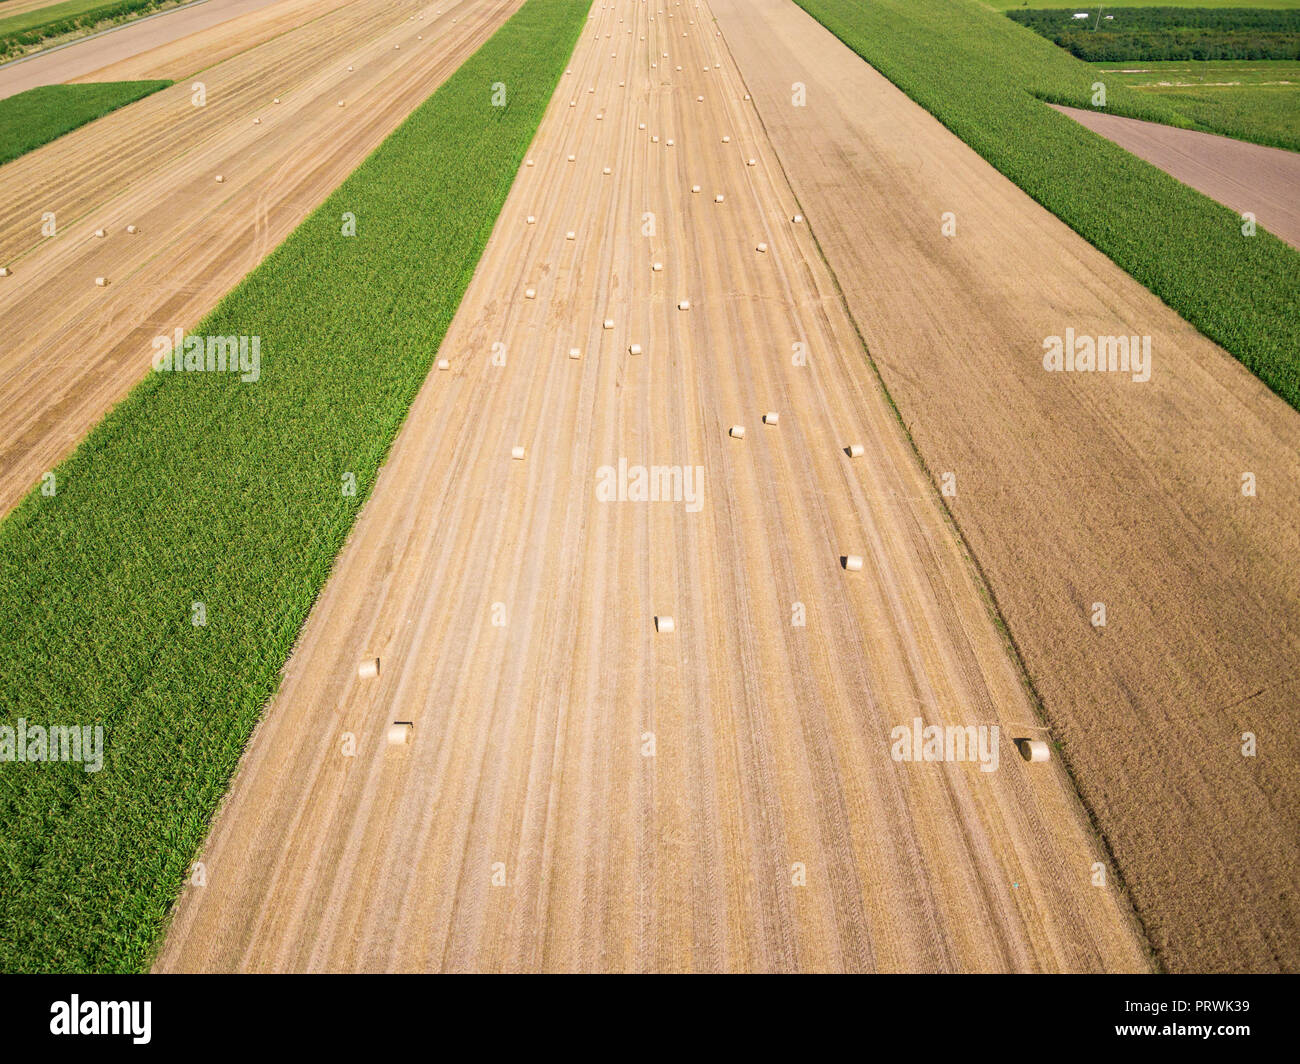 Aerial view of round hay bales on stubble under blue cloudy sky, diminishing perspective Stock Photo